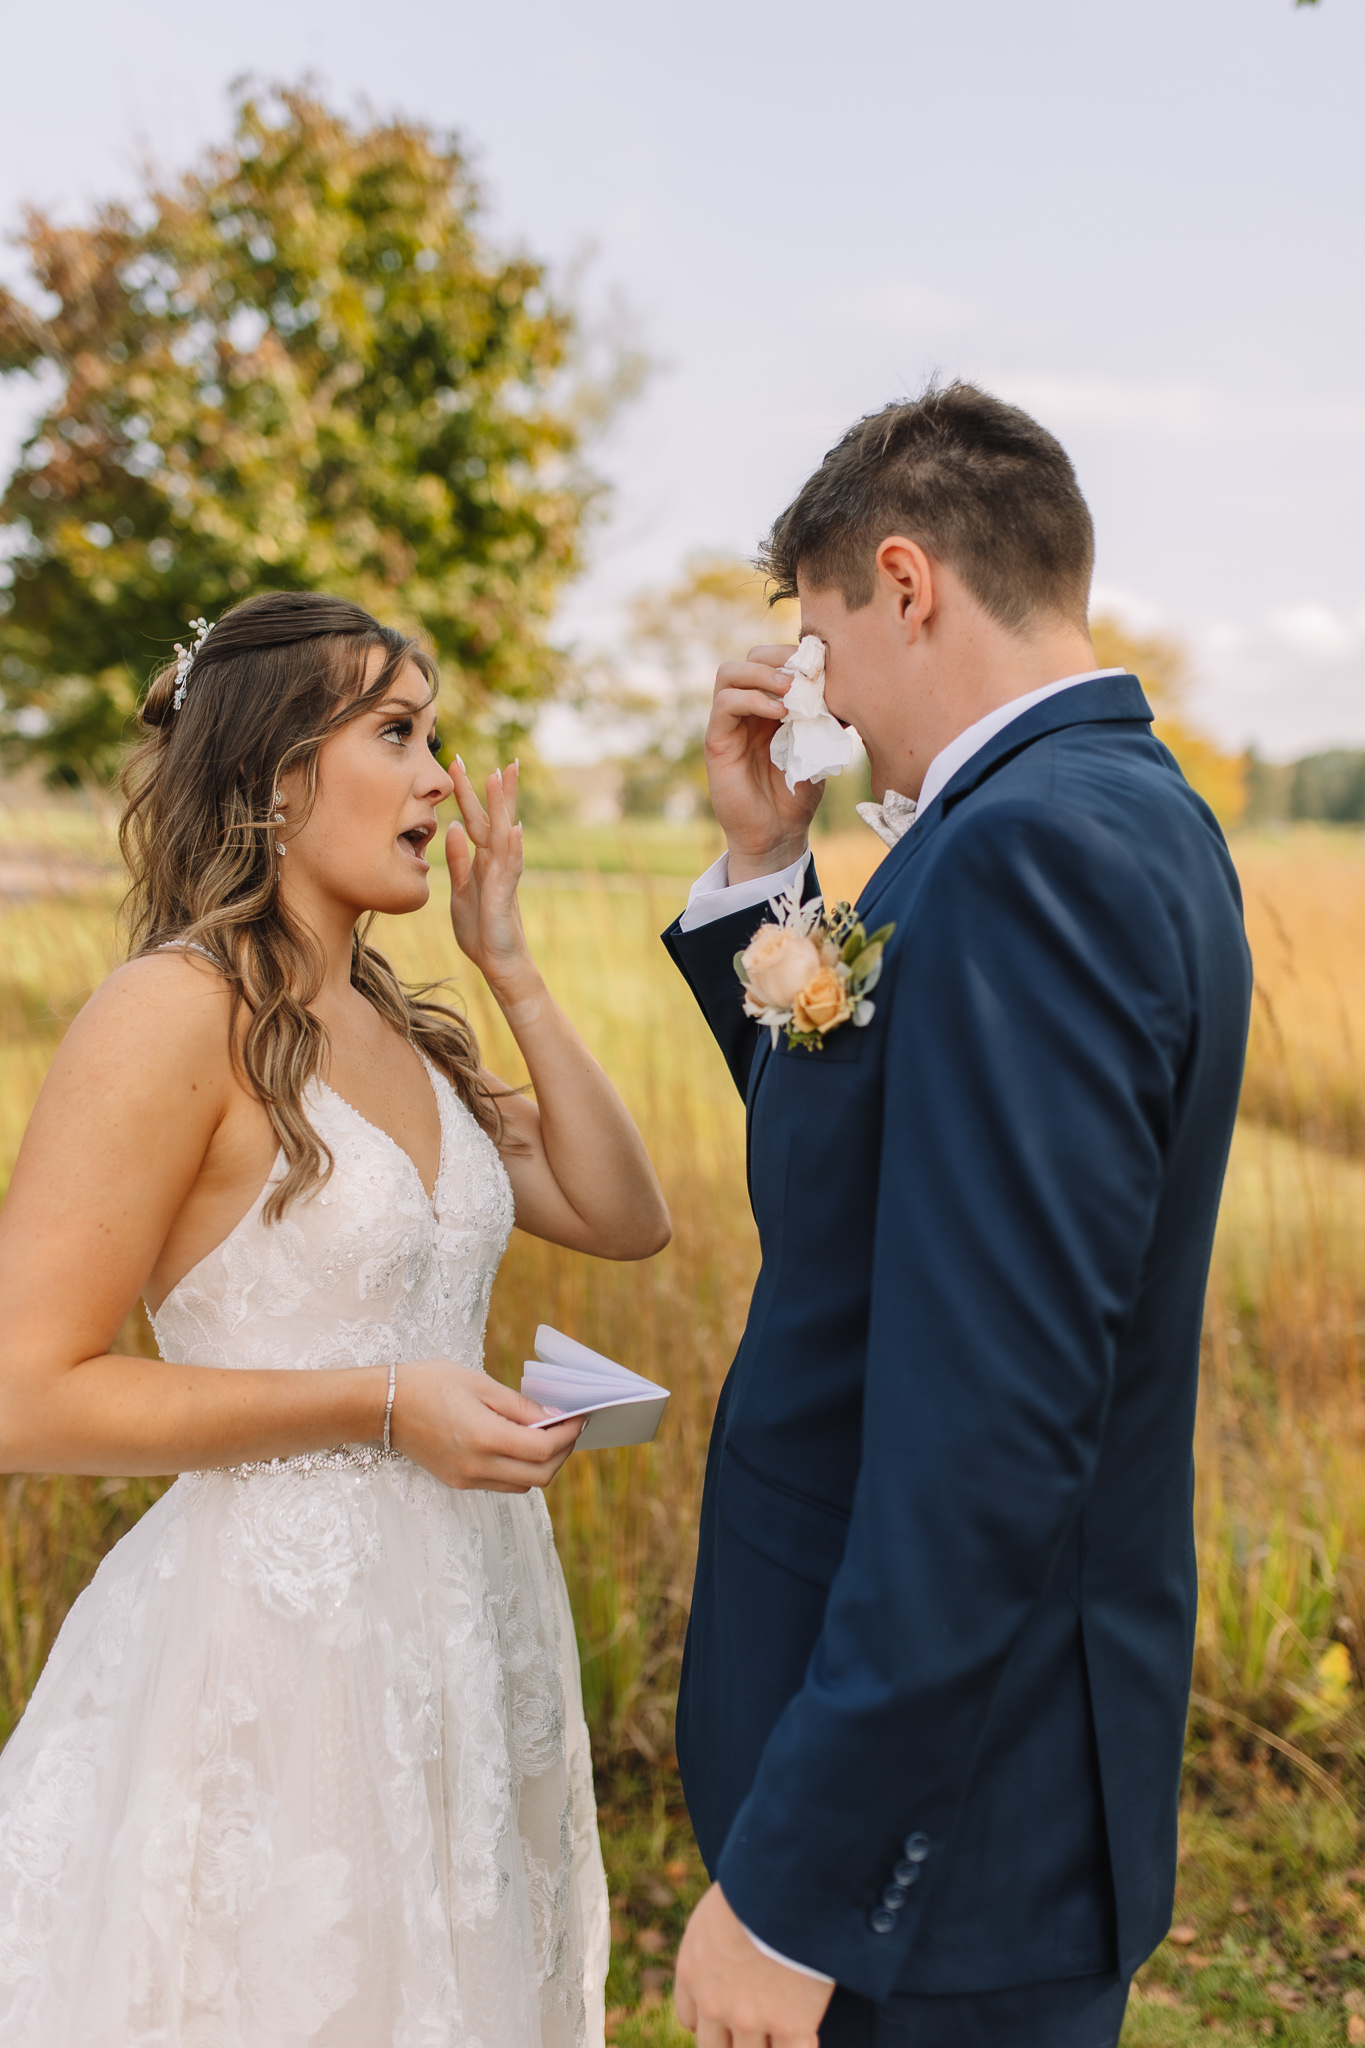 Emotional bride and groom exchanging private vows during their first look in Minneapolis, Minnesota